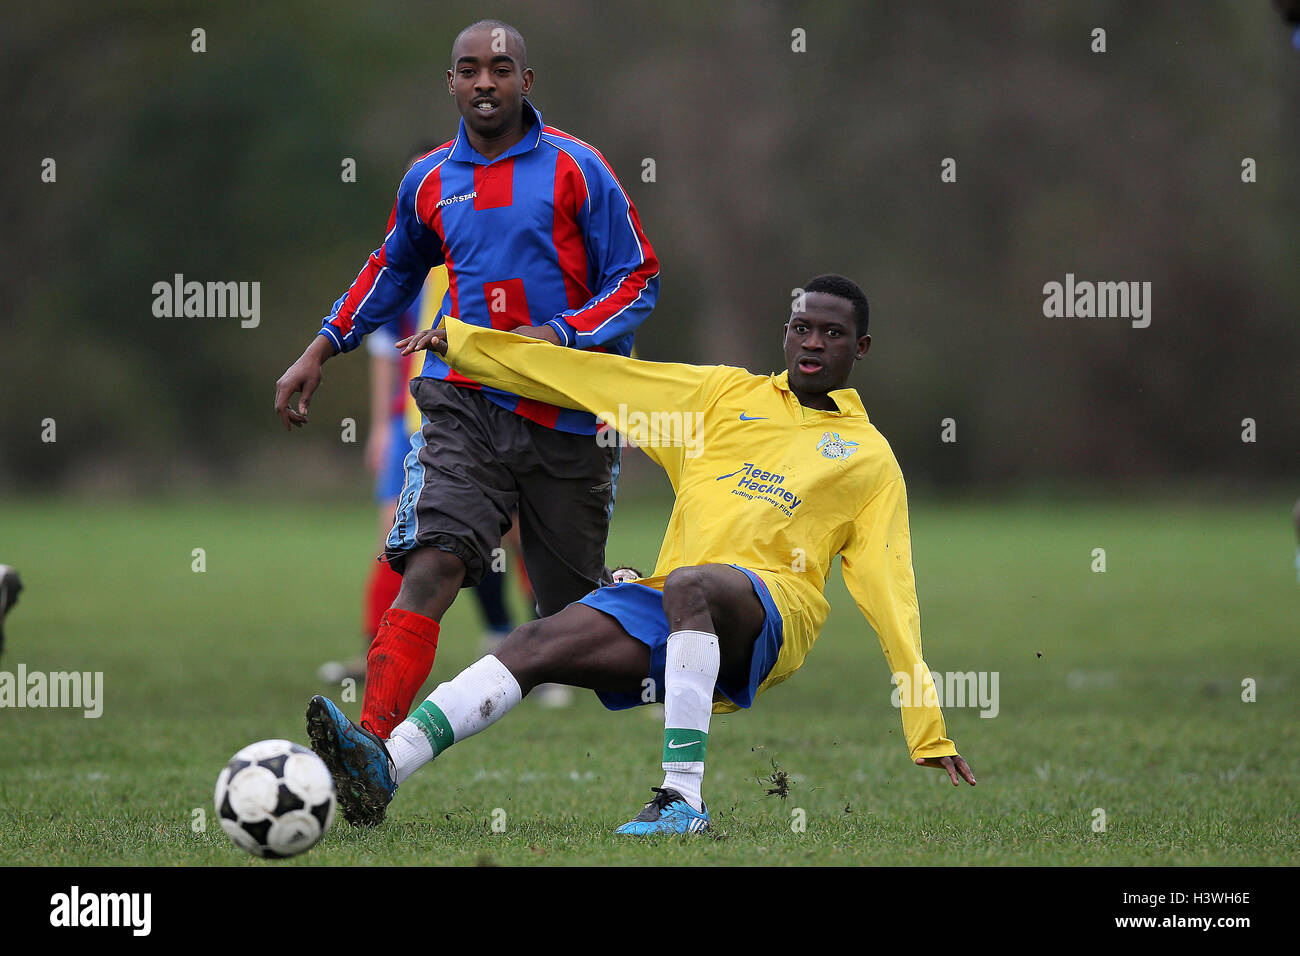 Clapton Rangers (yellow) vs Crownfield (red/blue) - East London Sunday League Football at South Marsh, Hackney Marshes - 21/11/10 Stock Photo